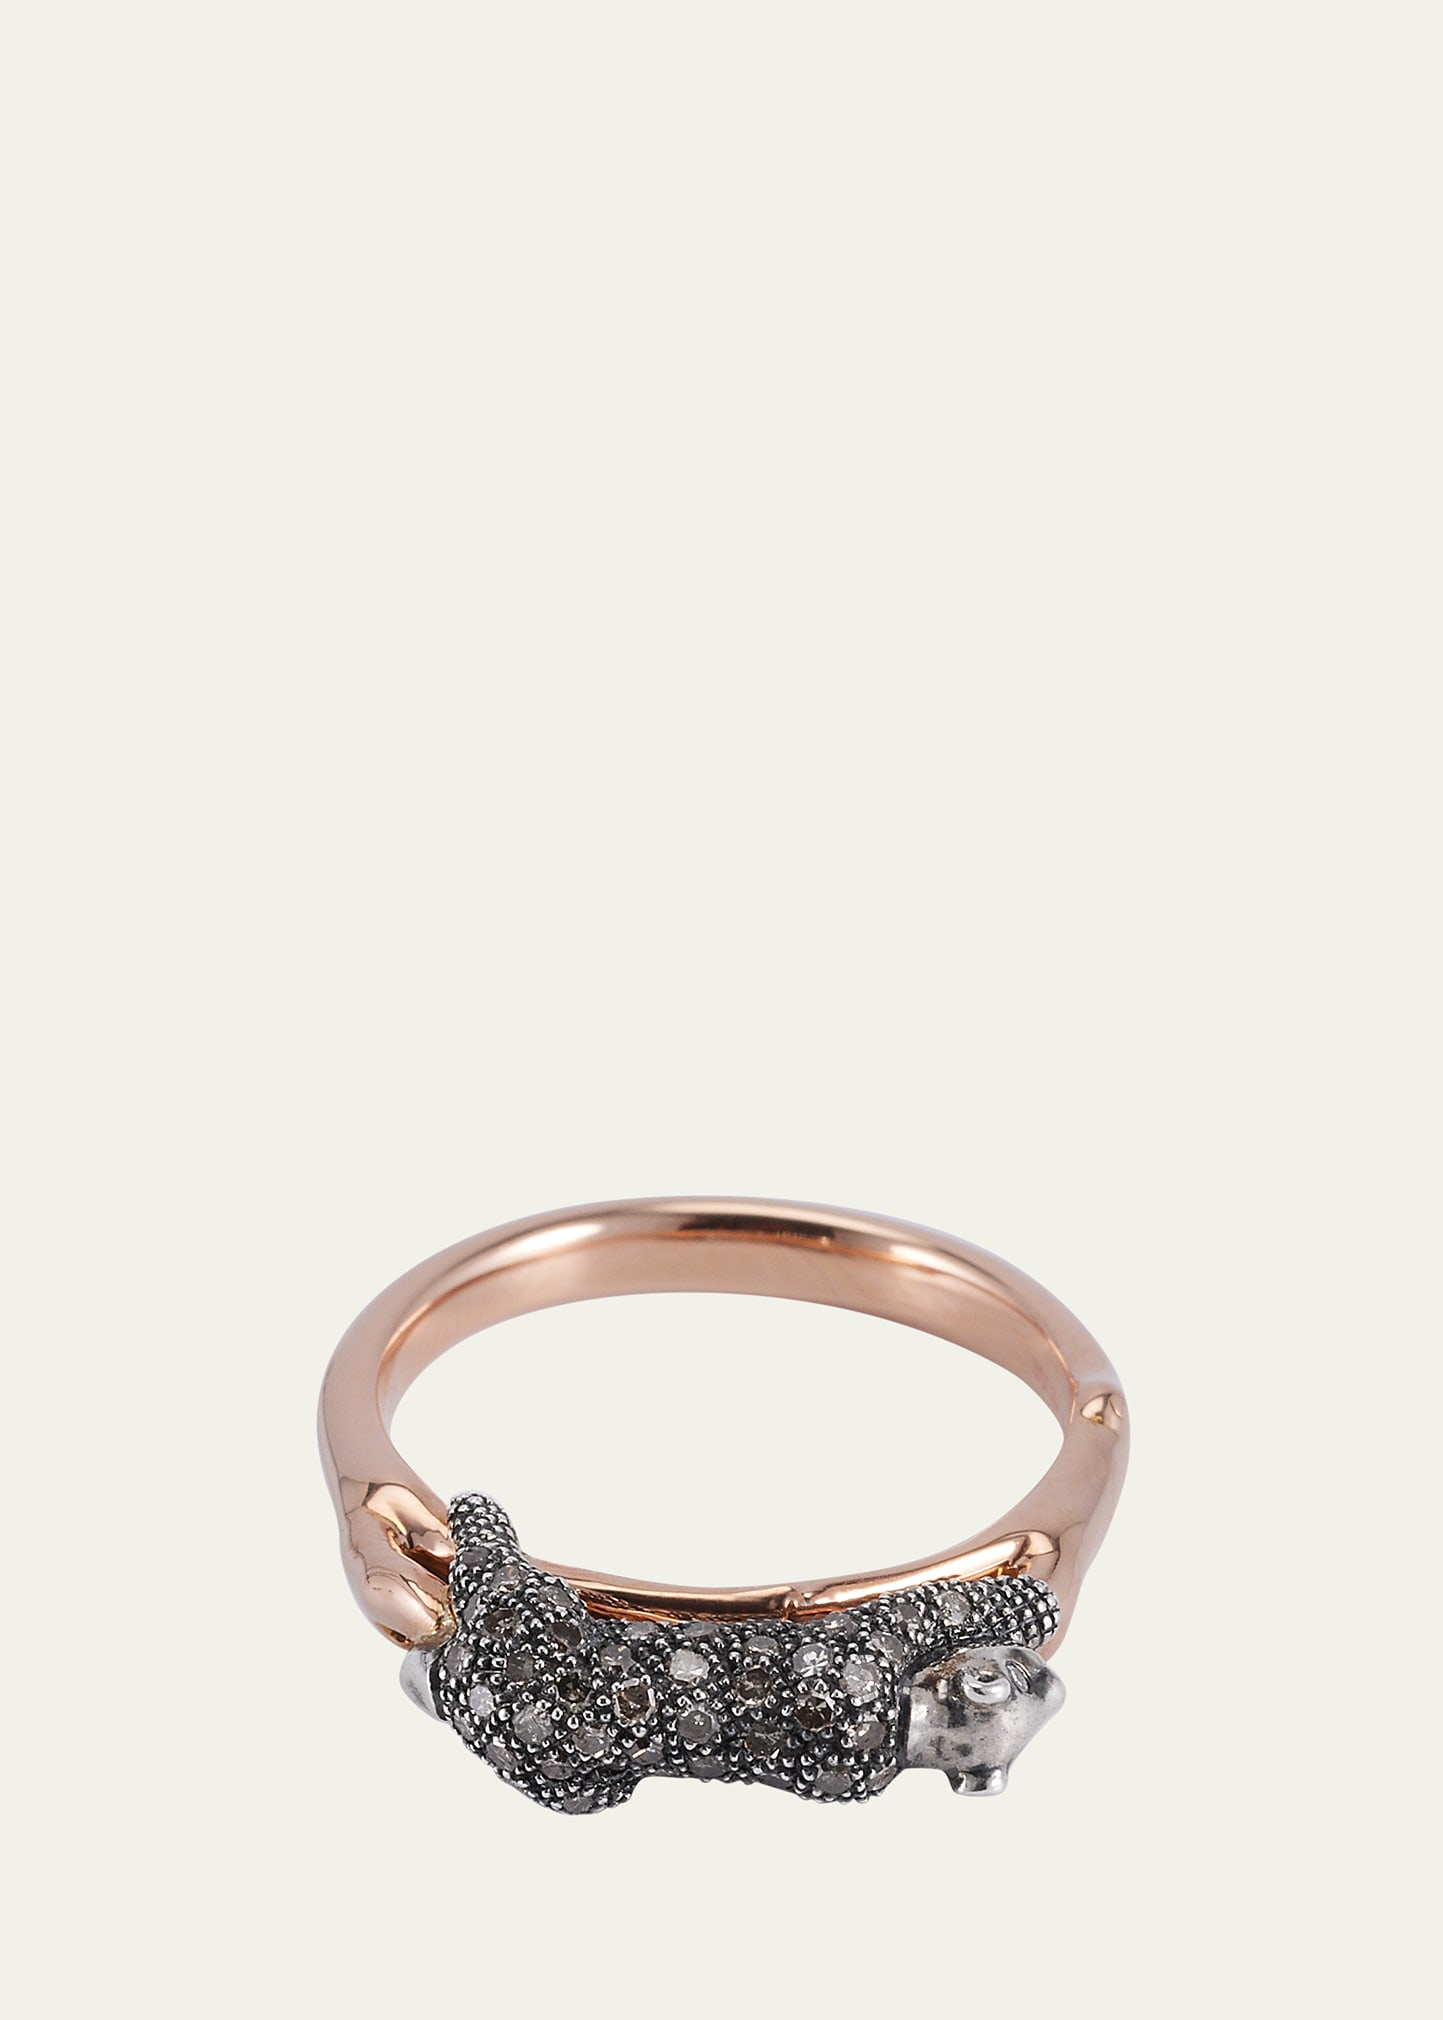 18K Rose Gold Panther Stackable Ring with Diamonds